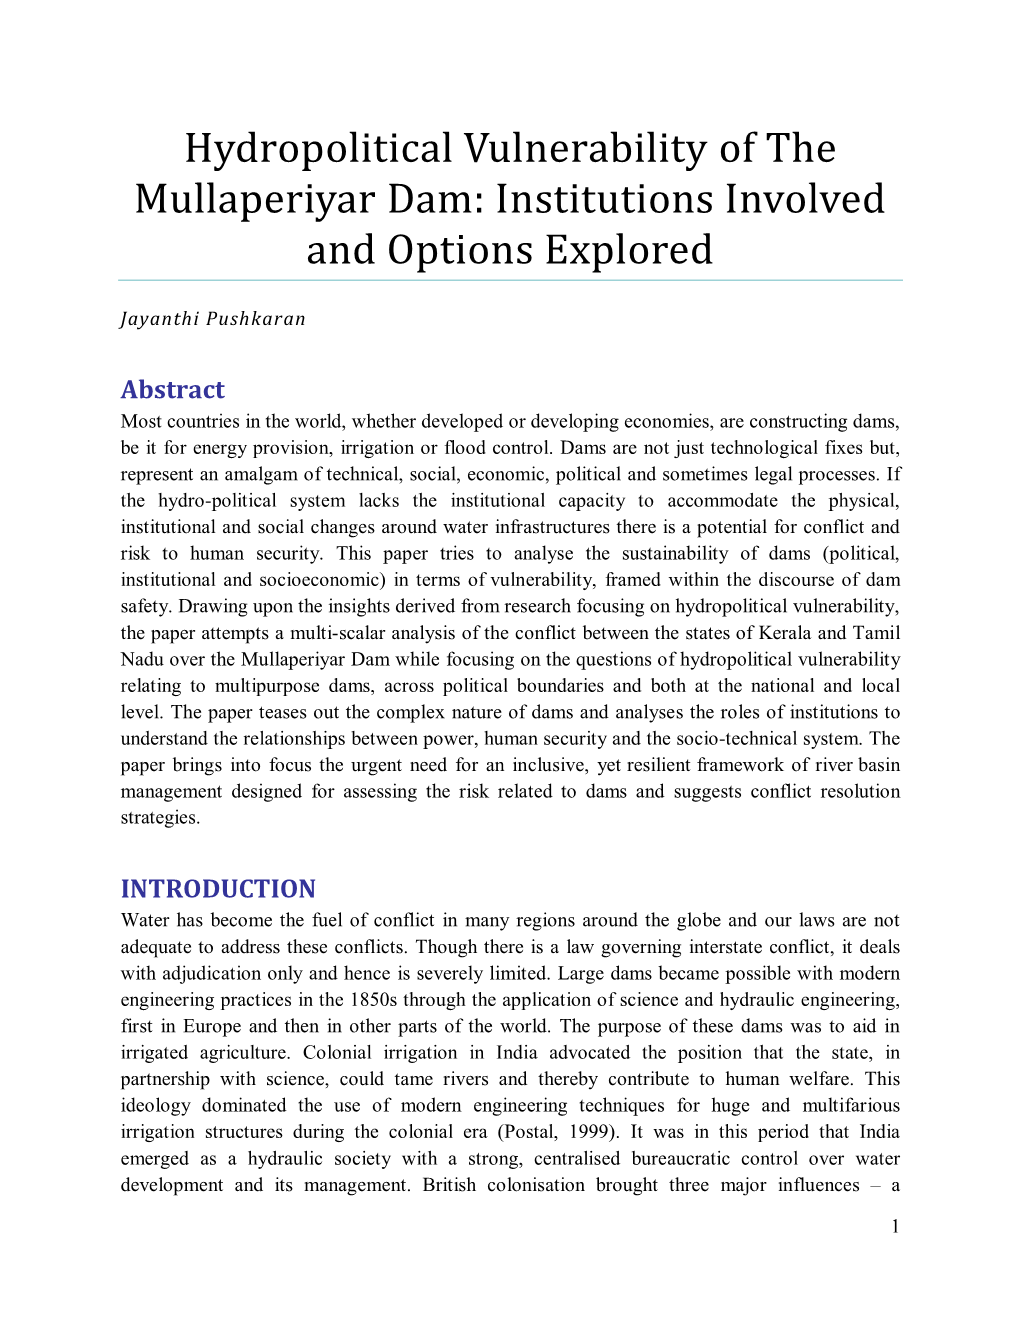 Hydropolitical Vulnerability of the Mullaperiyar Dam: Institutions Involved and Options Explored